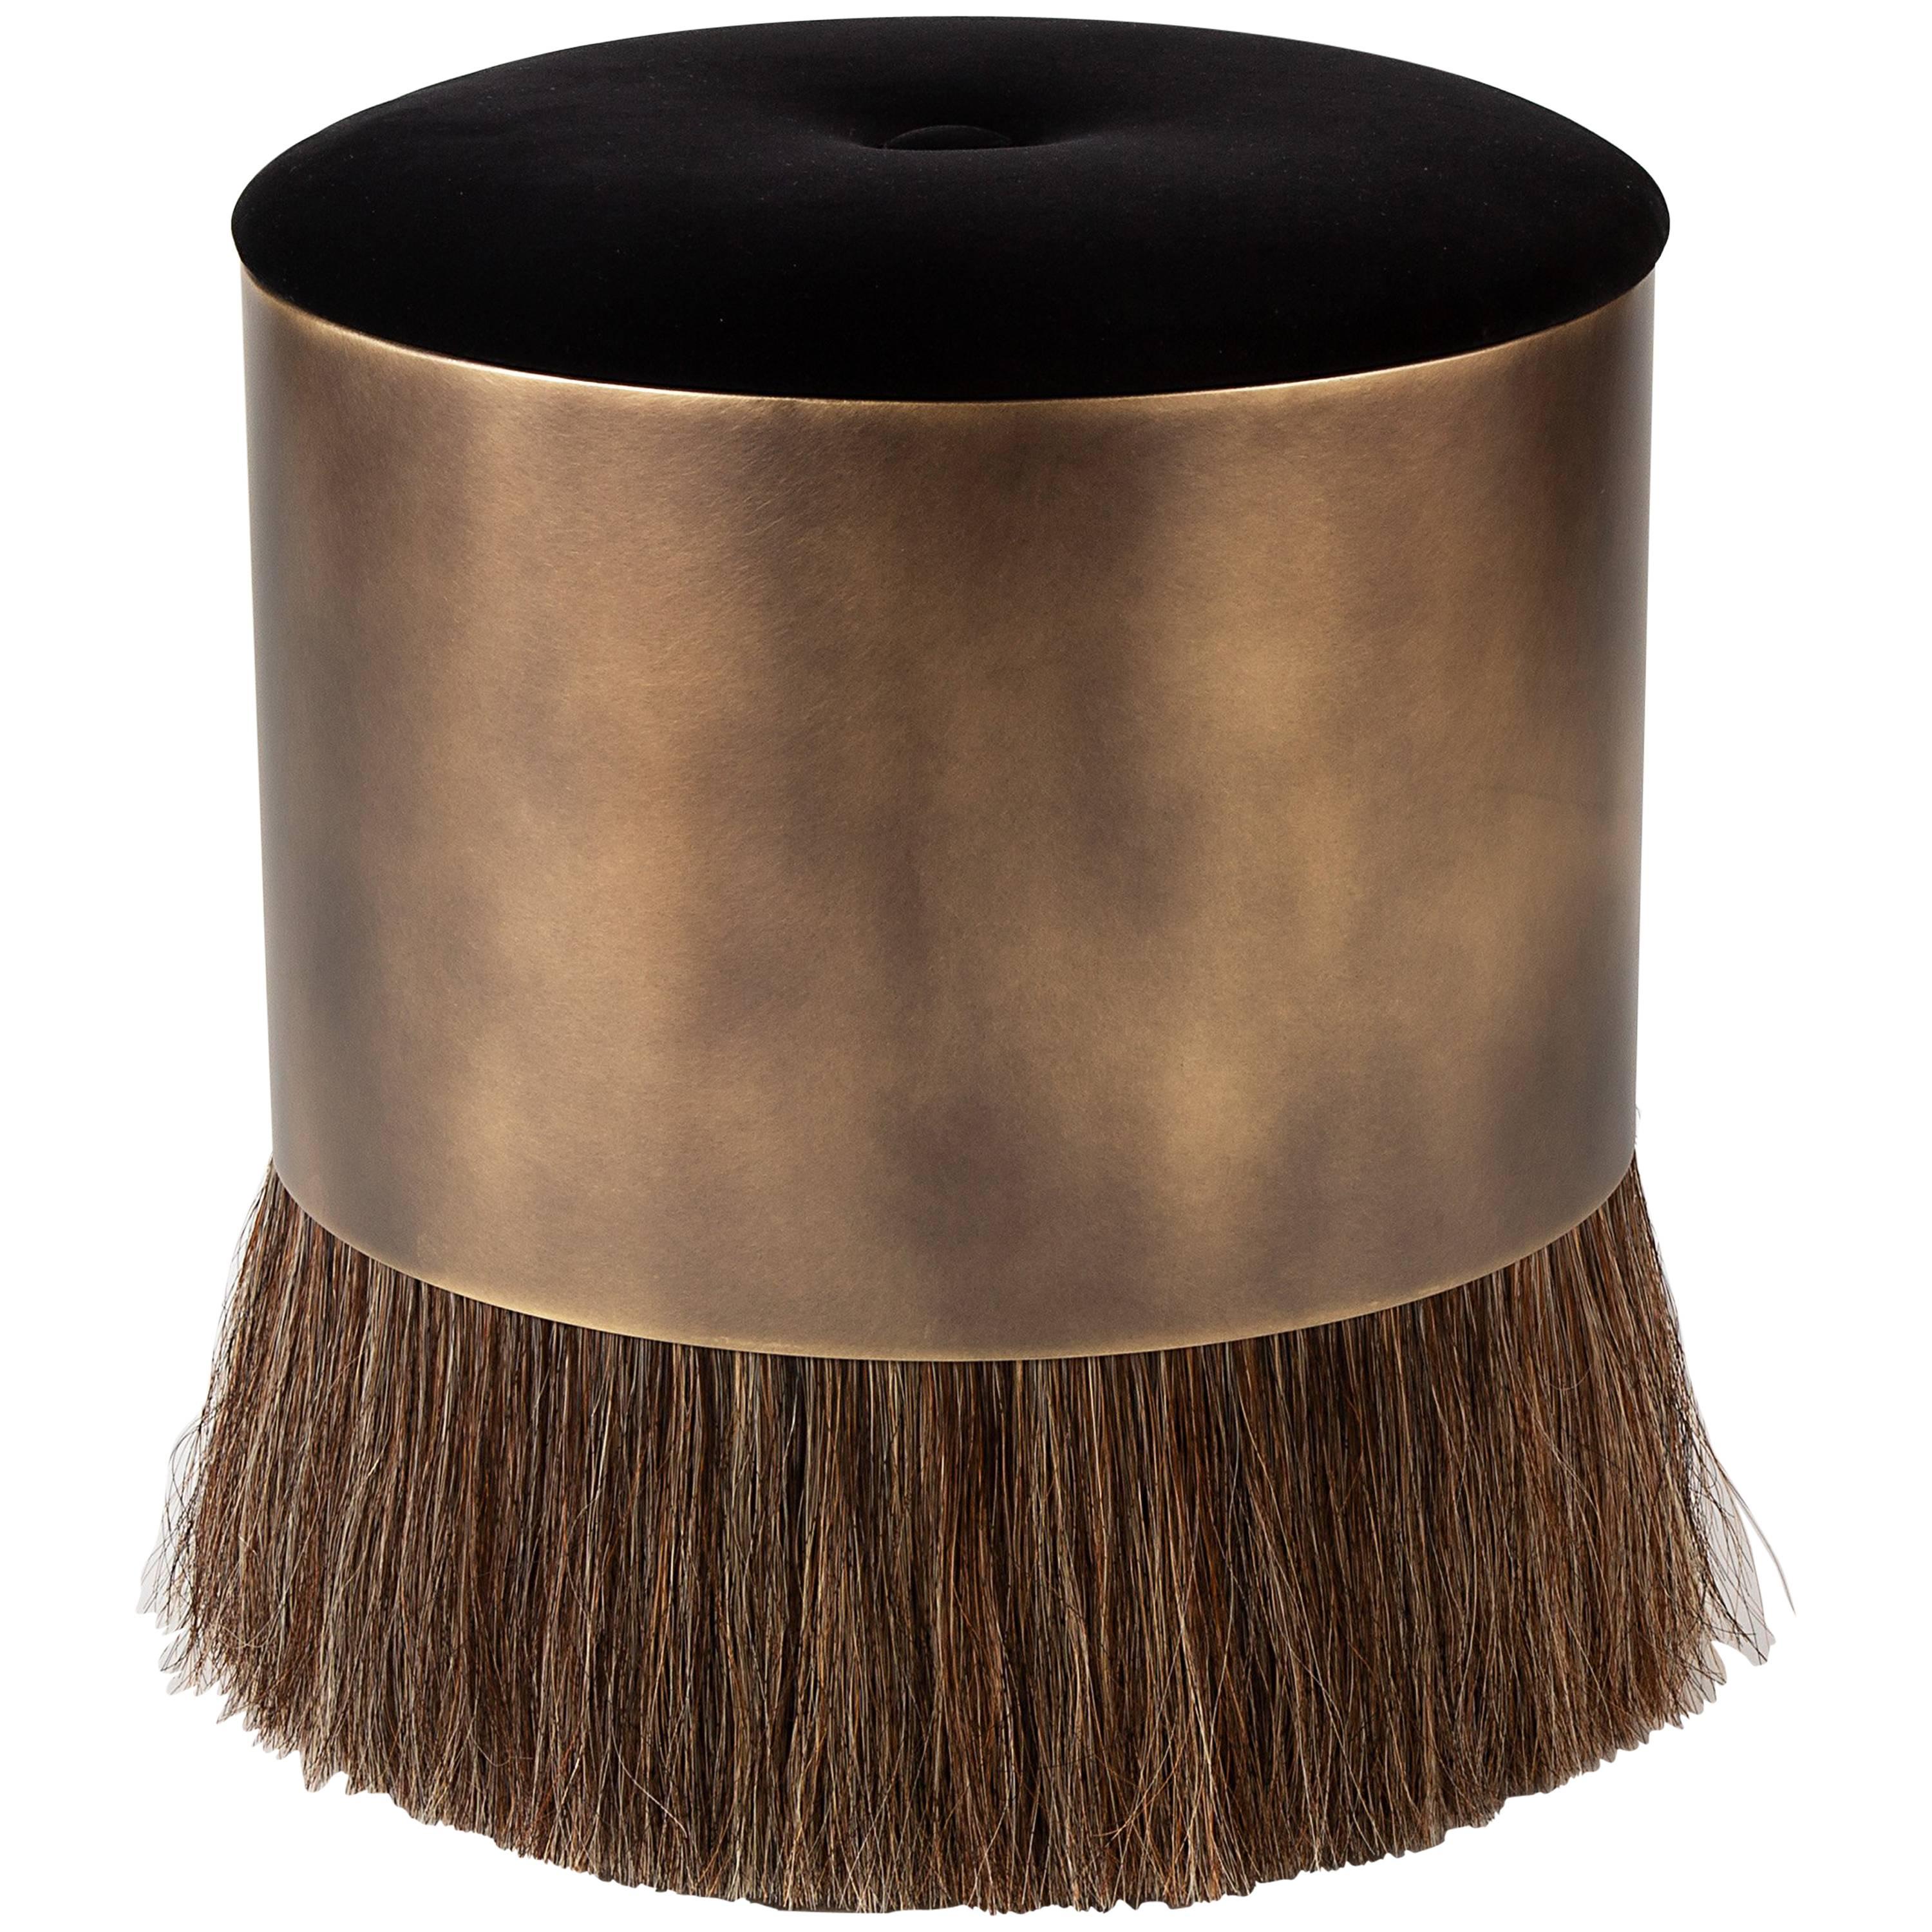 Konekt Thing 4 Stool with Antique Brass, Horse Hair and Velvet For Sale